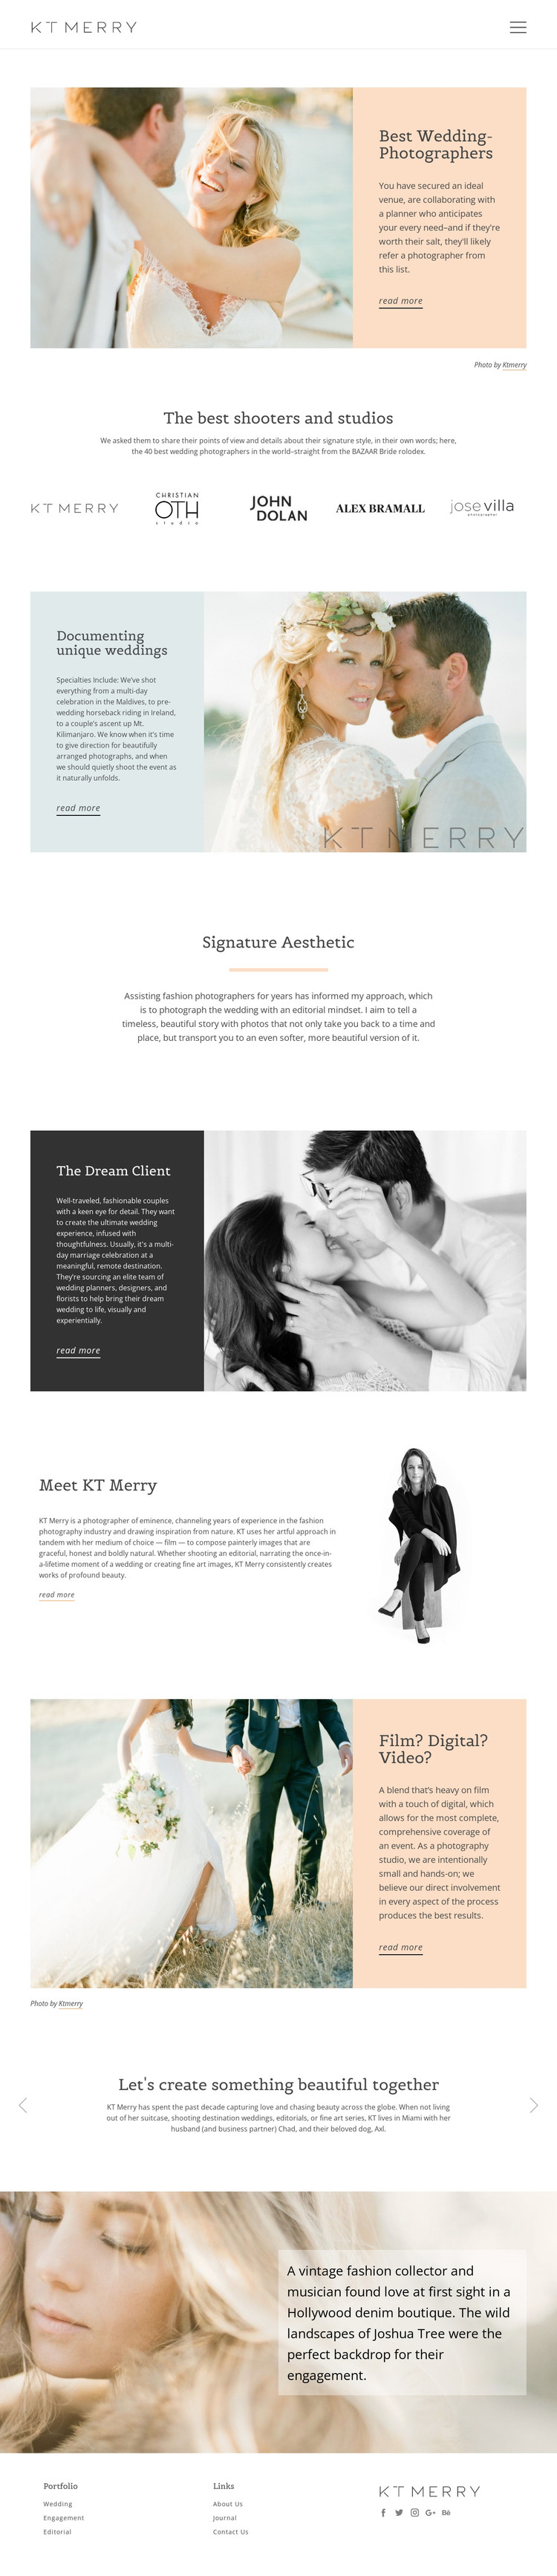 Shooters for special wedding Web Design